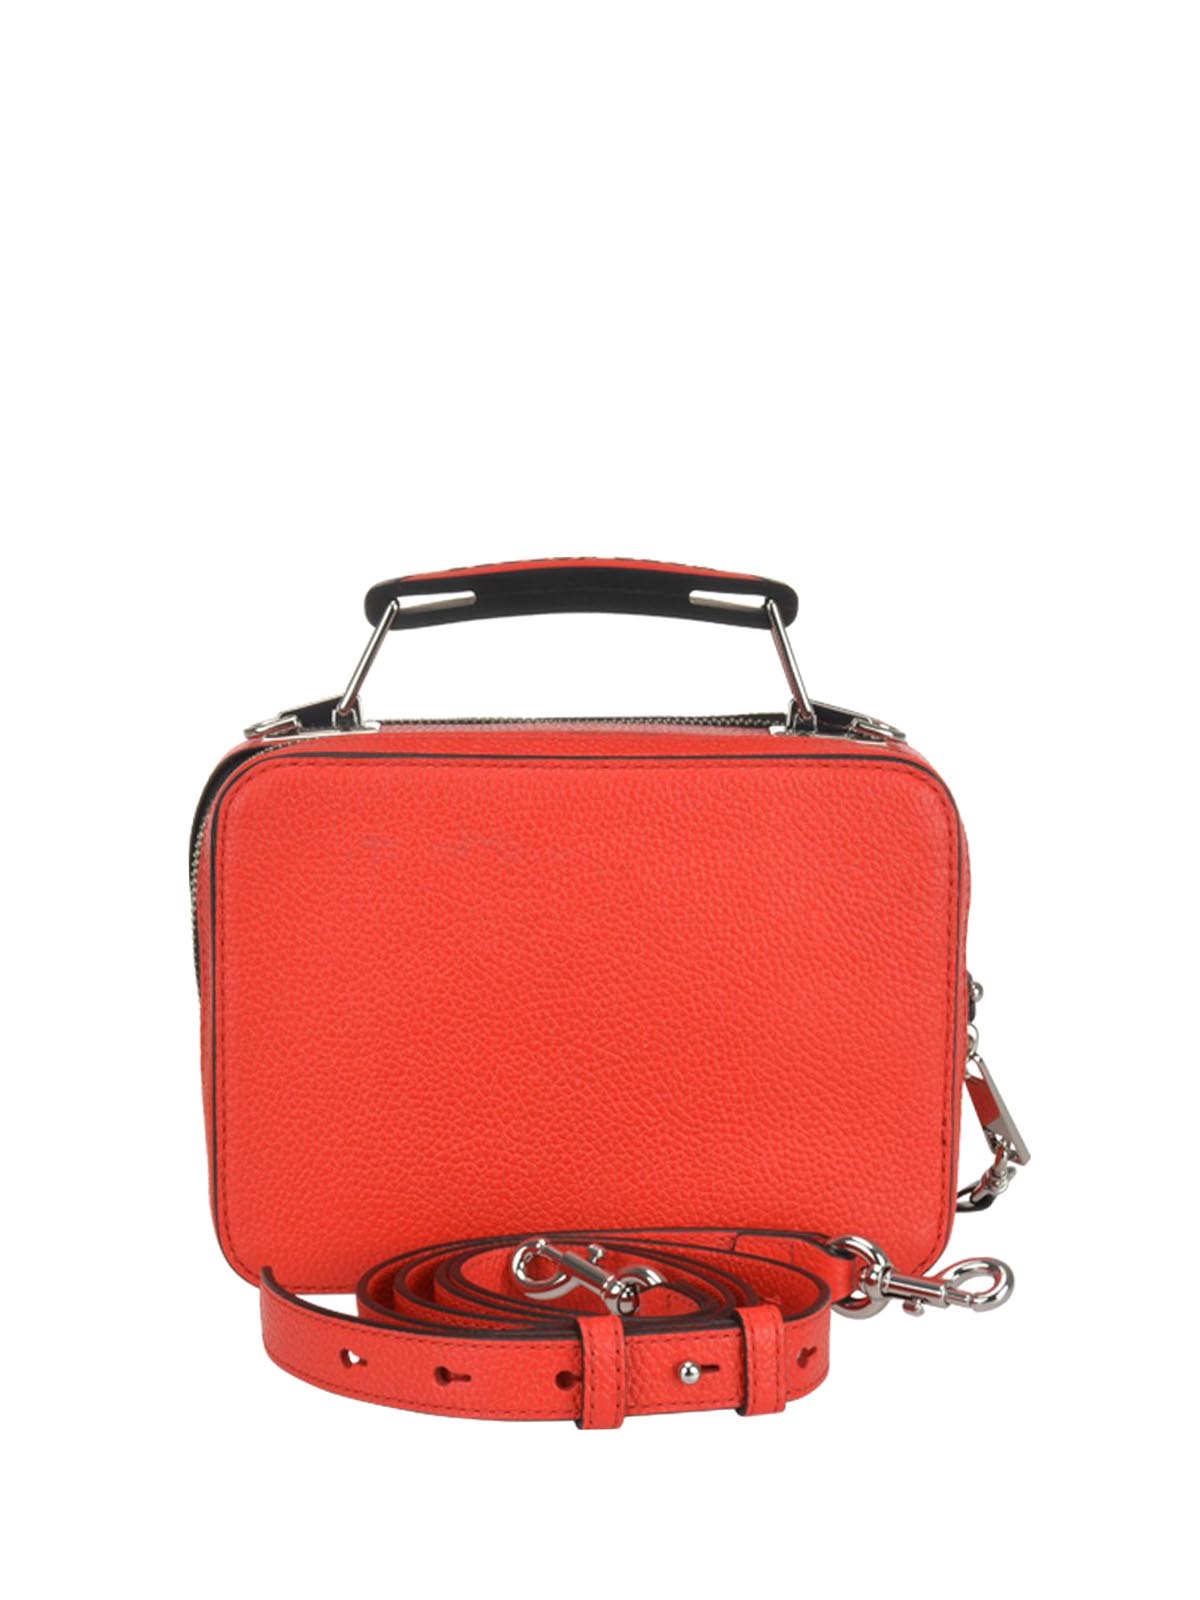 Marc Jacobs Red The Textured Mini Box Bag